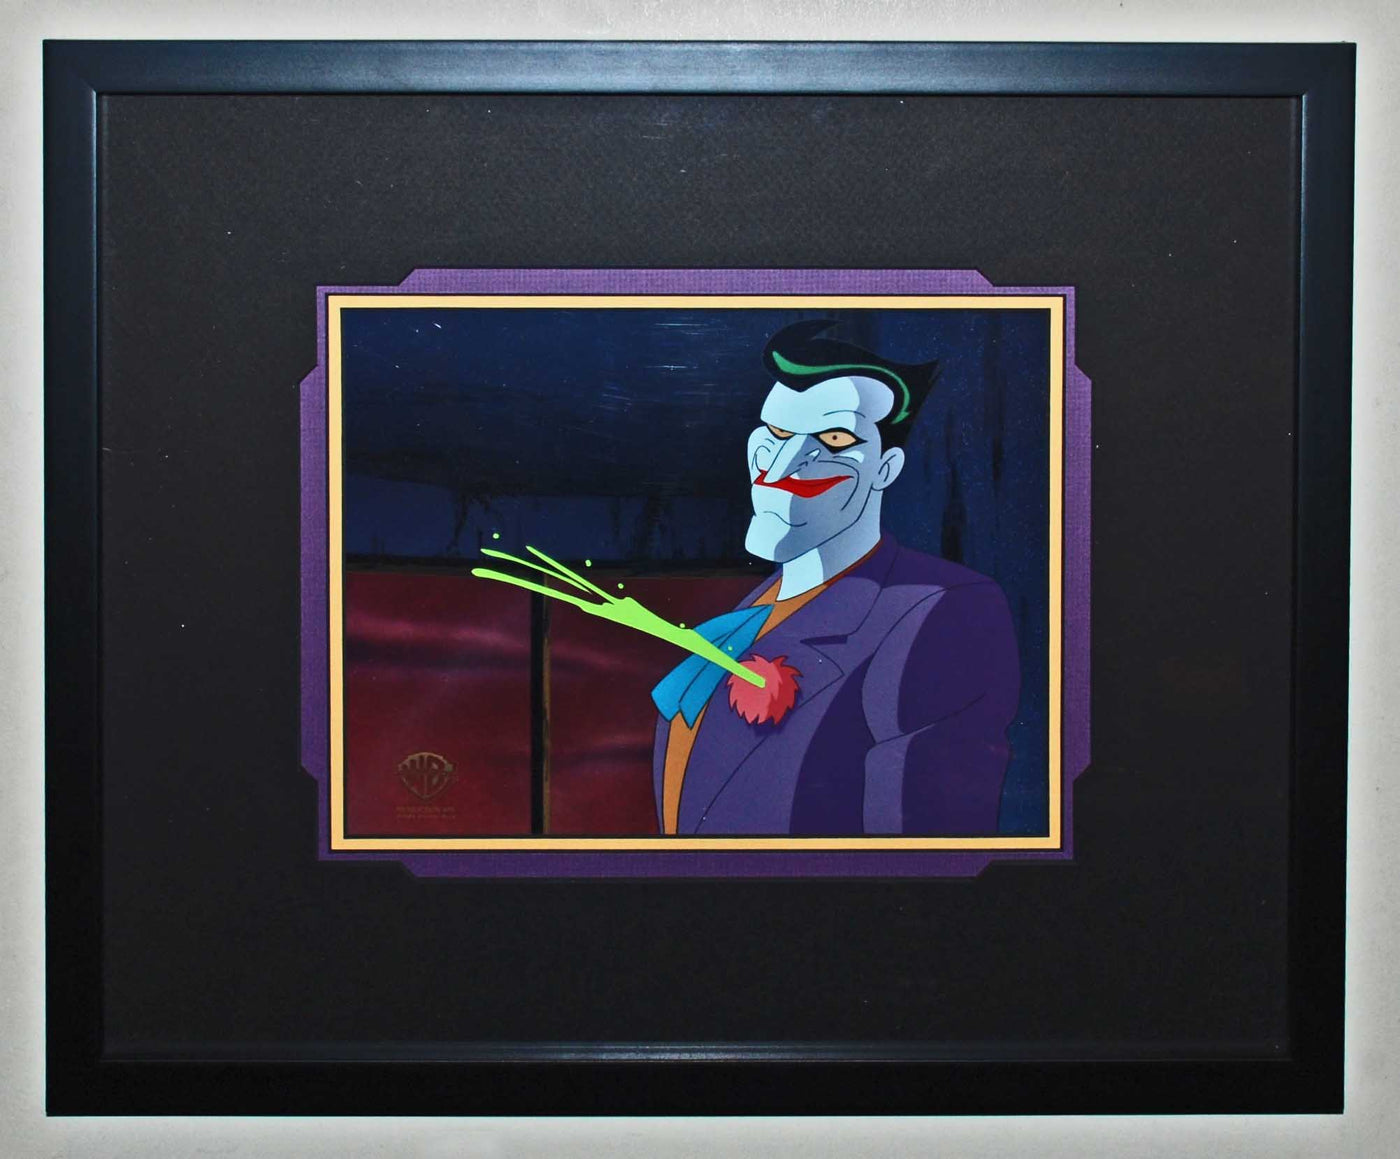 Original WB Production Cel from Batman: The Feature "Mask of the Phantasm" featuring the Joker